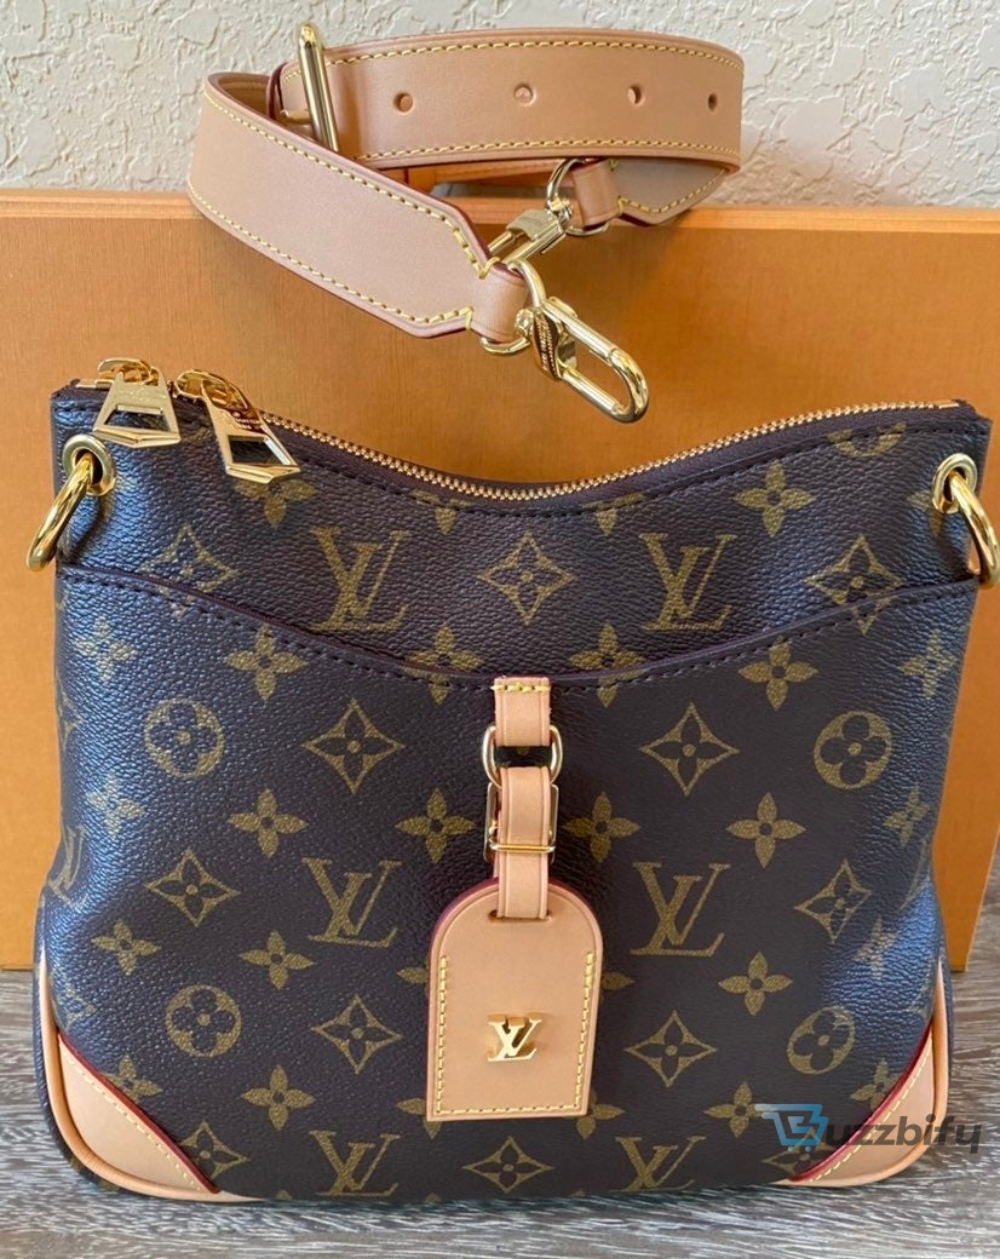 louis vuitton odeon pm monogram canvas natural for fallwinter womens handbags shoulder and crossbody bags 11in28cm lv m45354 2799 buzzbify 1 22